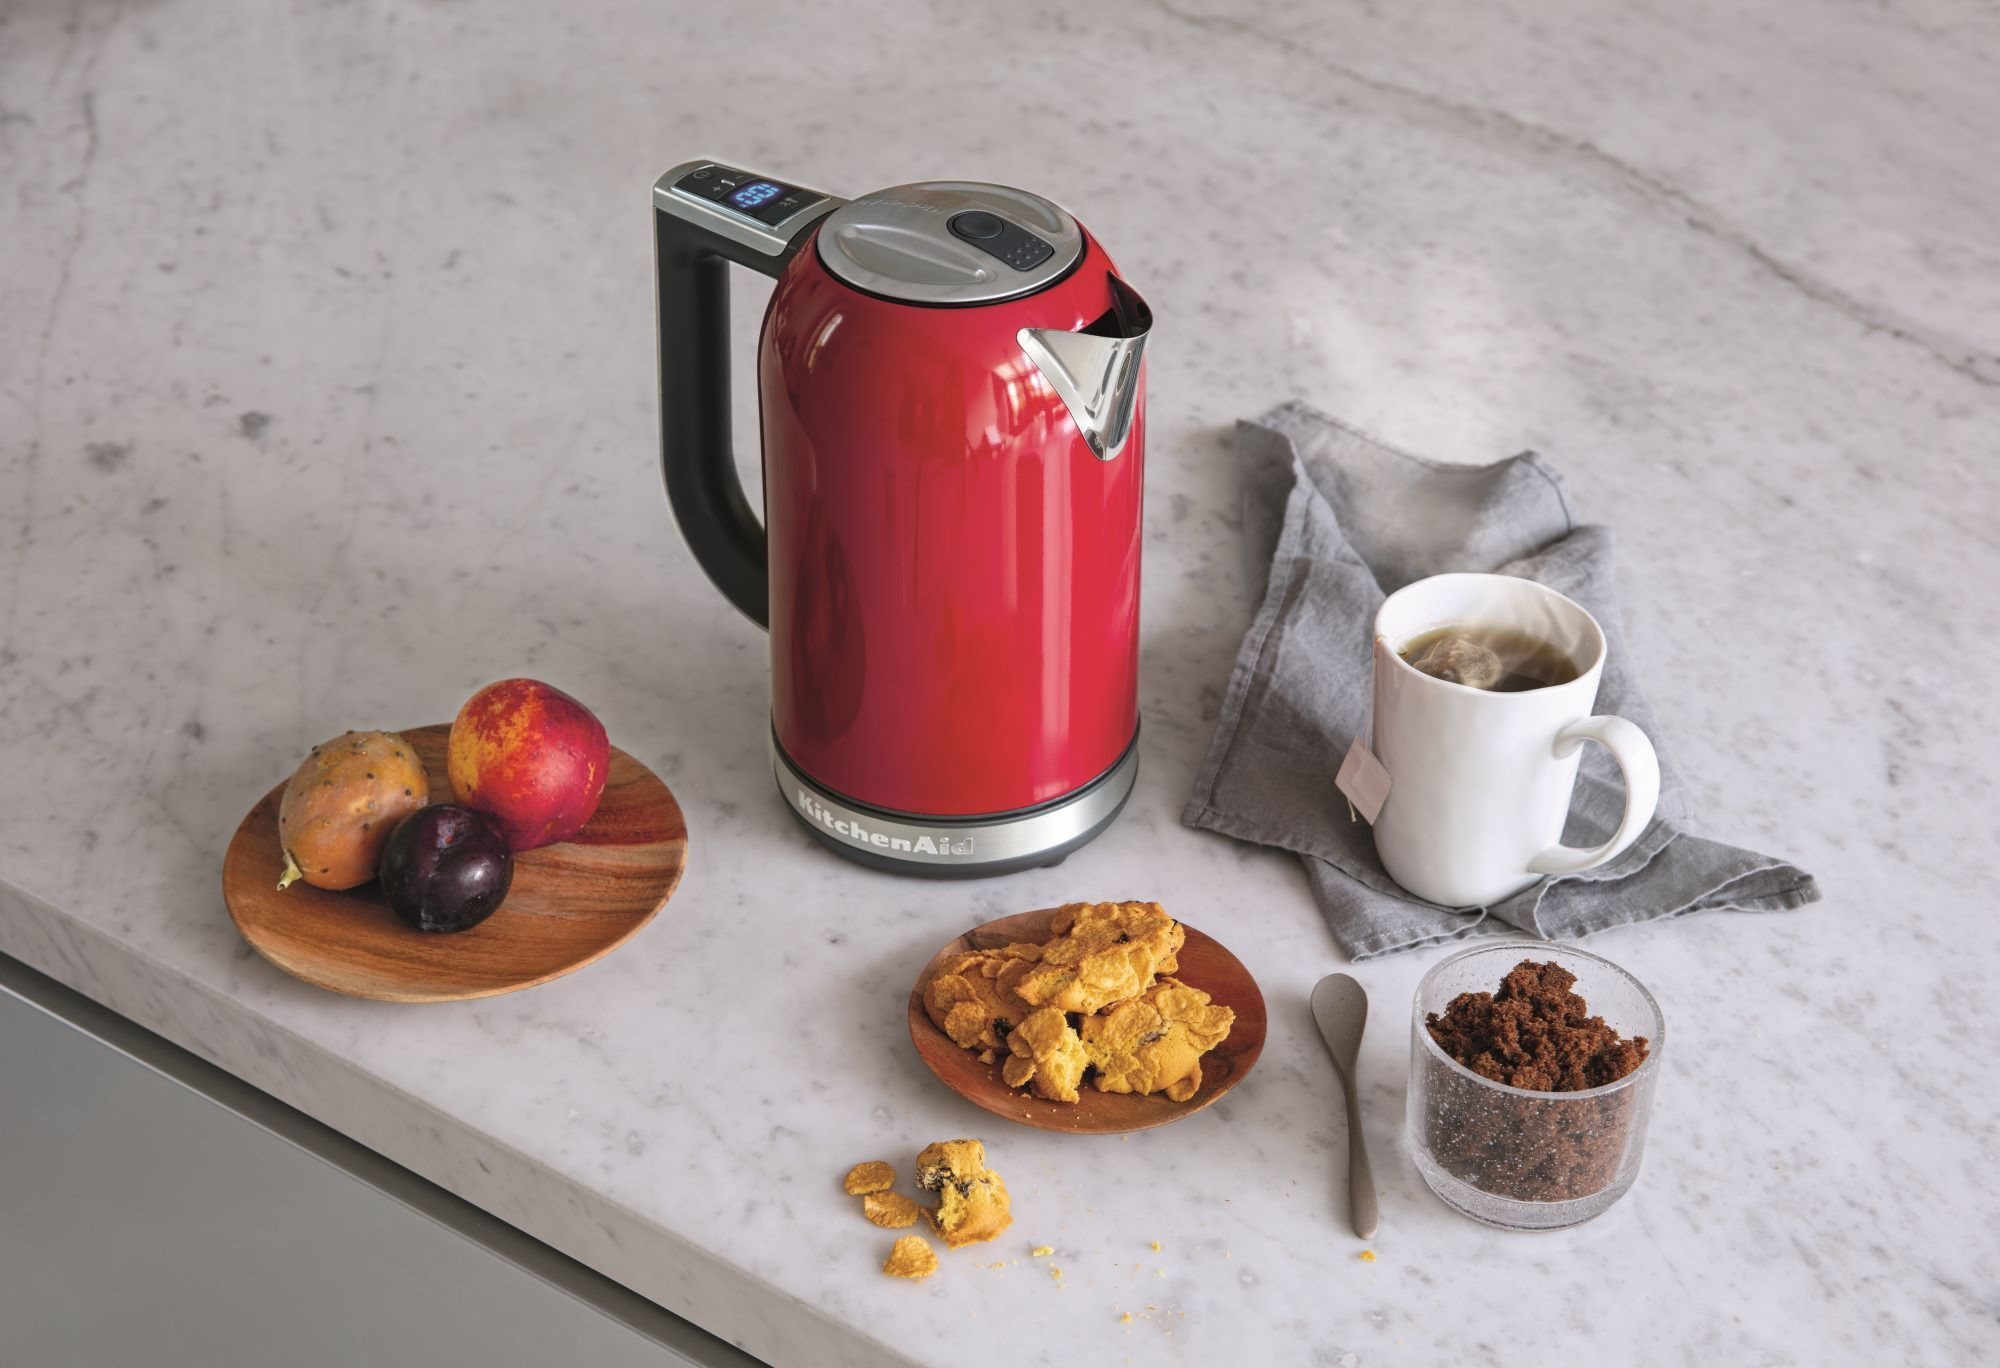 Electric Kettle (Empire Red), KitchenAid